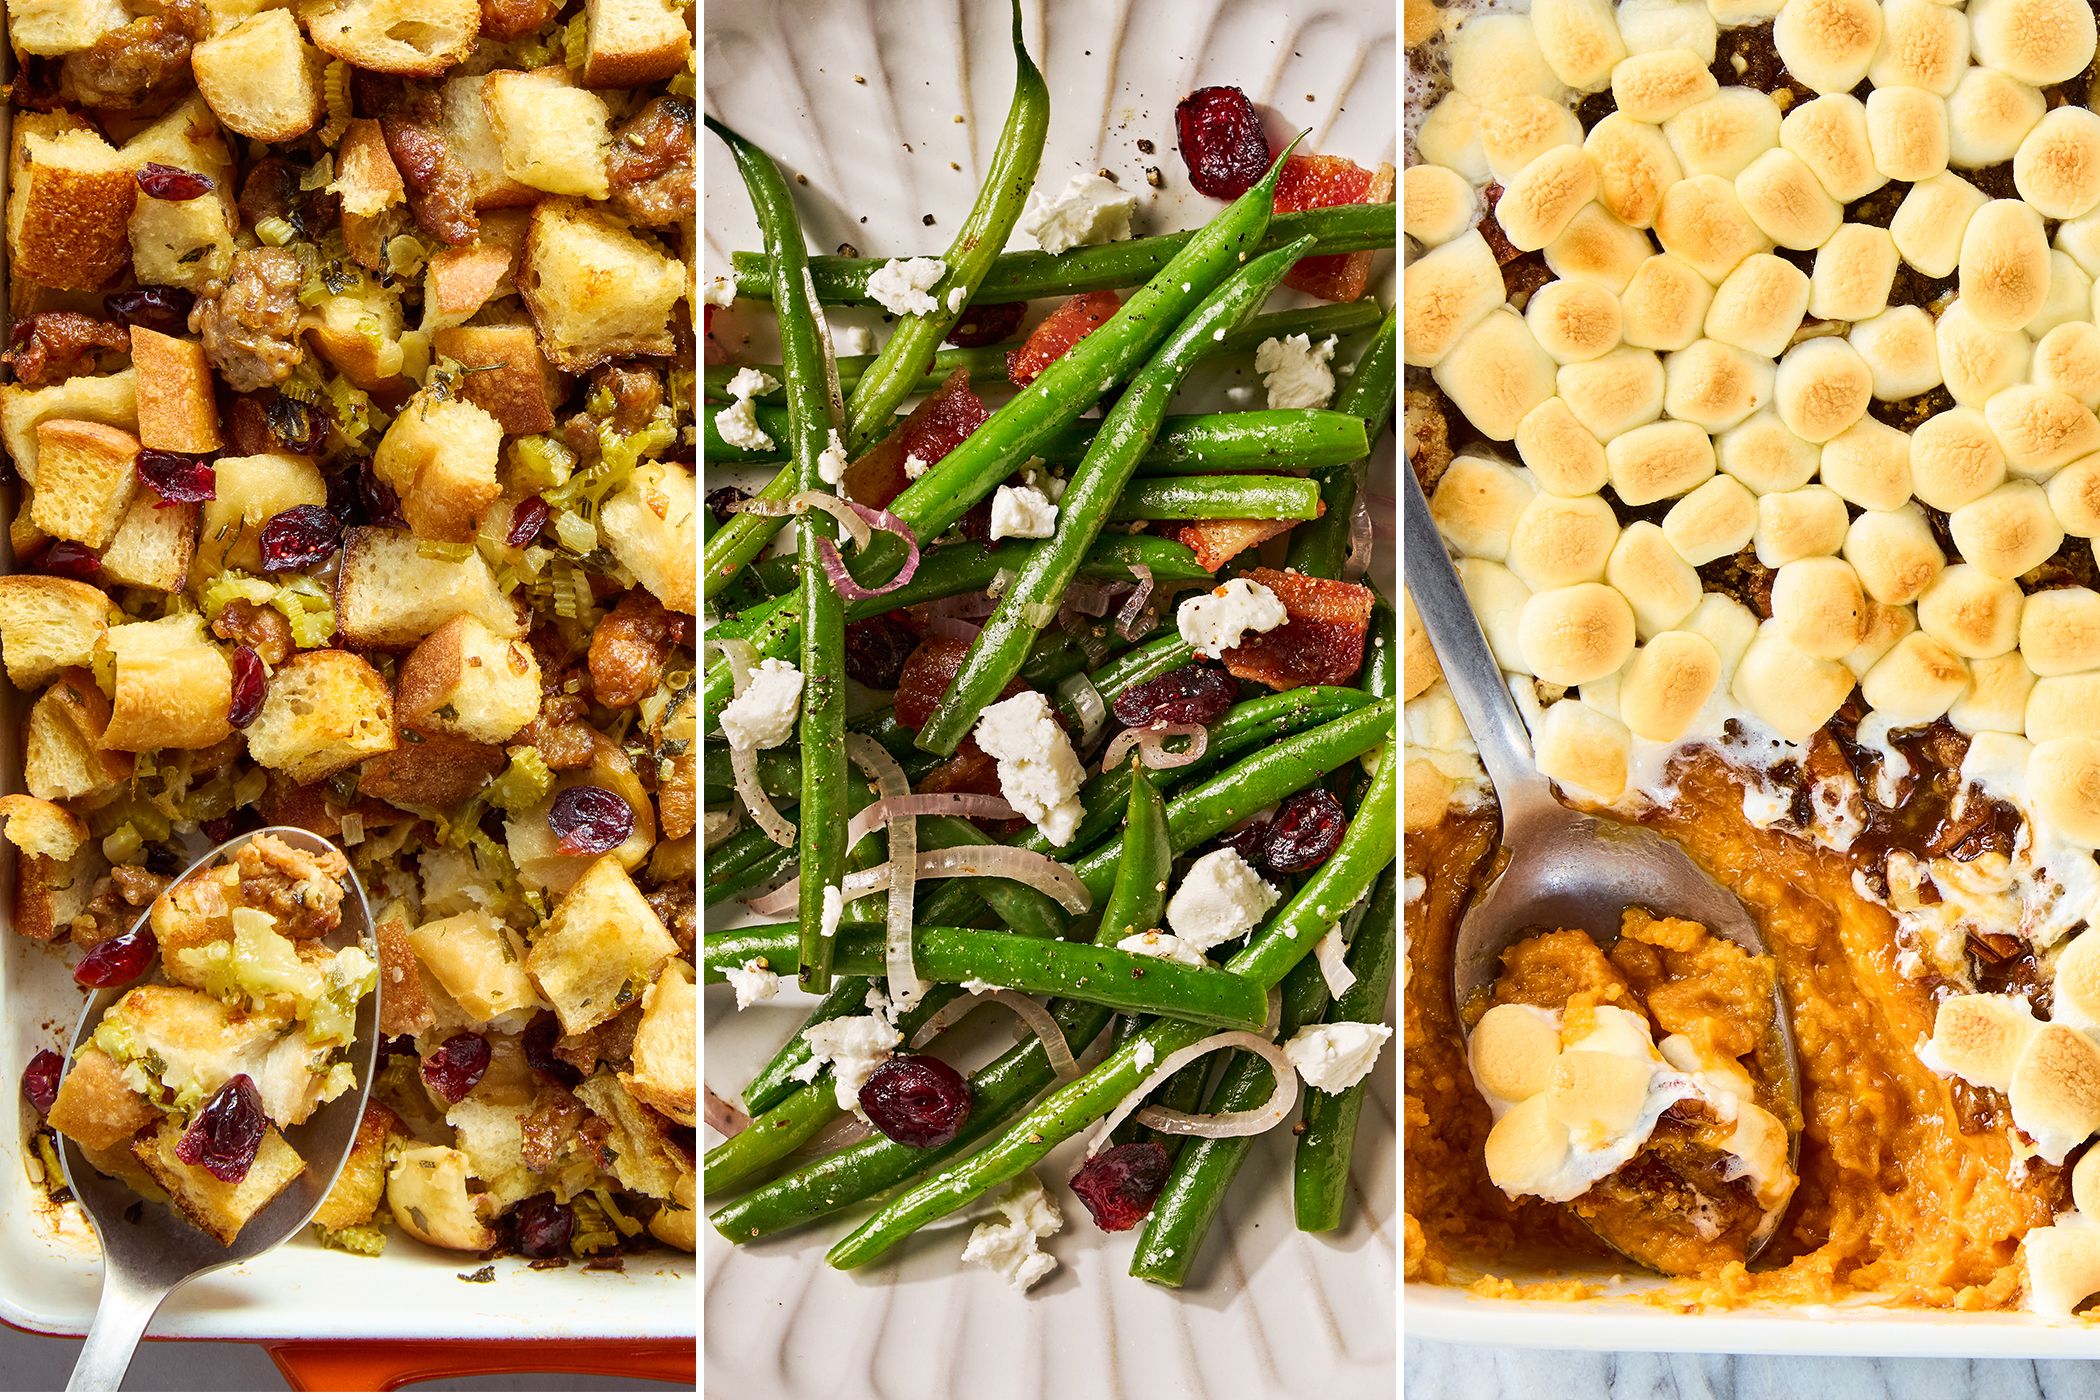 26 Holiday Recipes to Sleigh the Season with Deliciousness